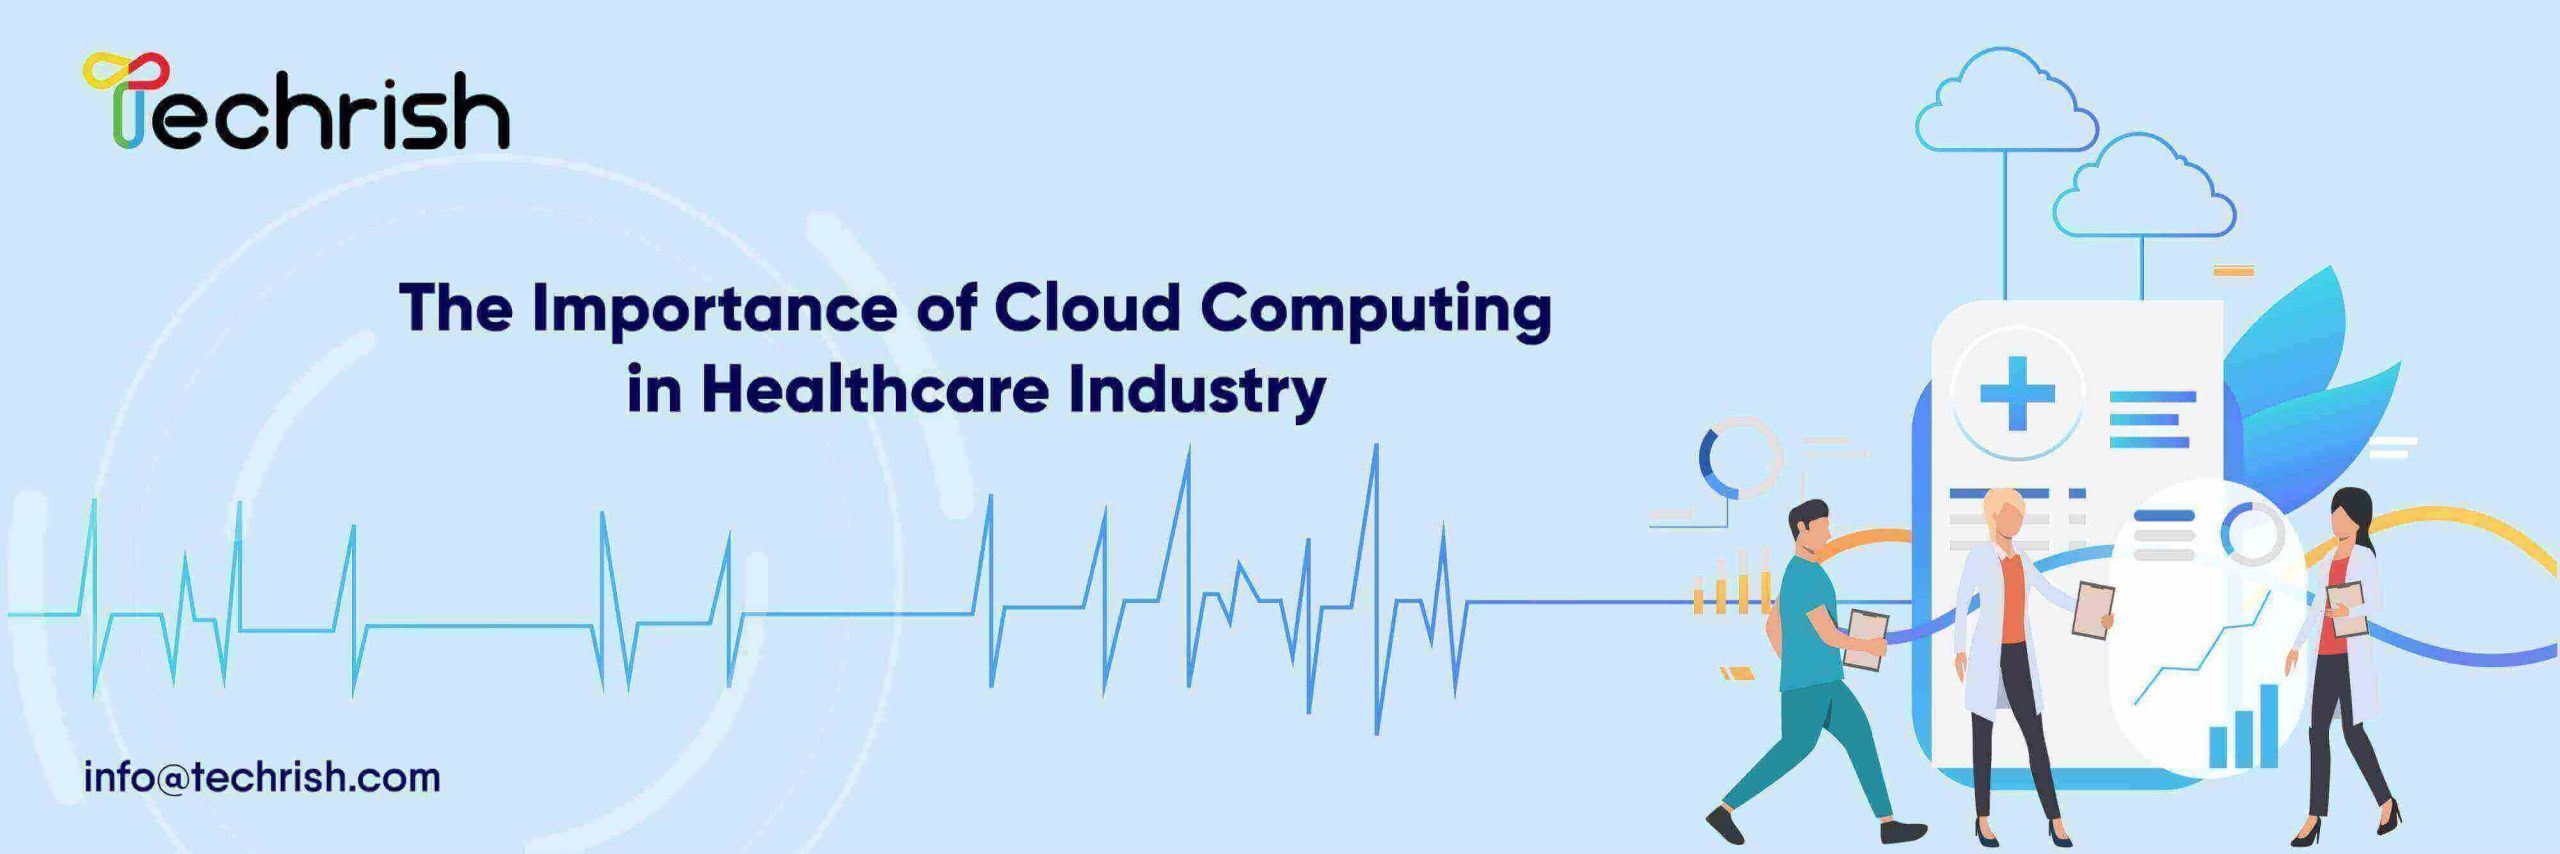 The Importance of Cloud Computing in Healthcare Industry